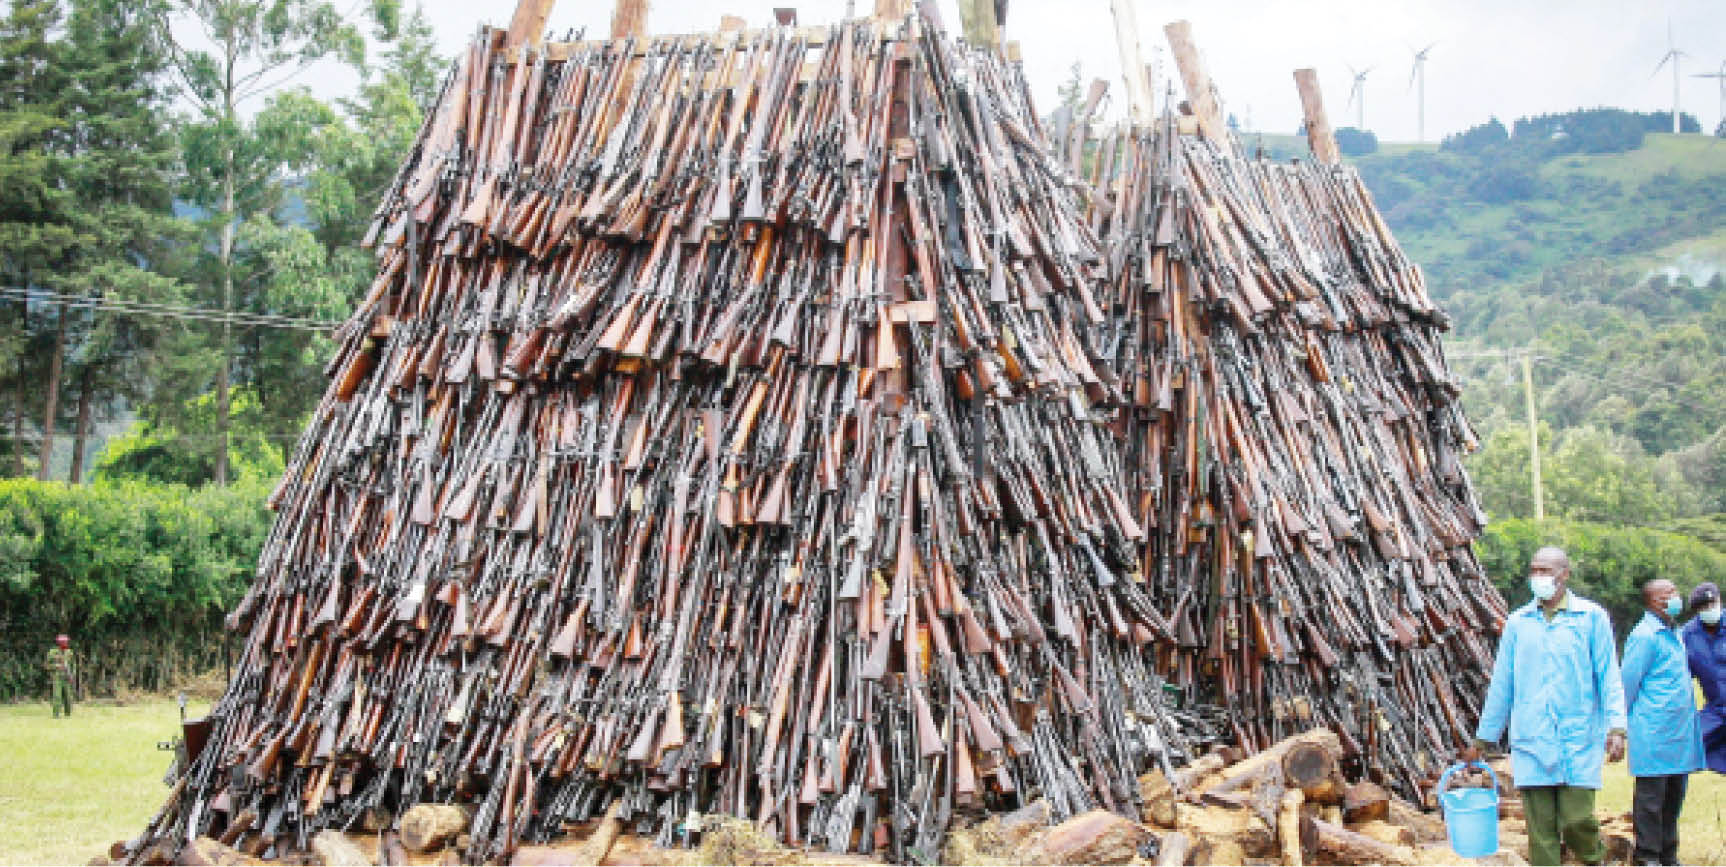 Illegal firearms were voluntarily surrendered by civilians in Kenya for the government’s amnesty since 2020 are piled to burn yesterday